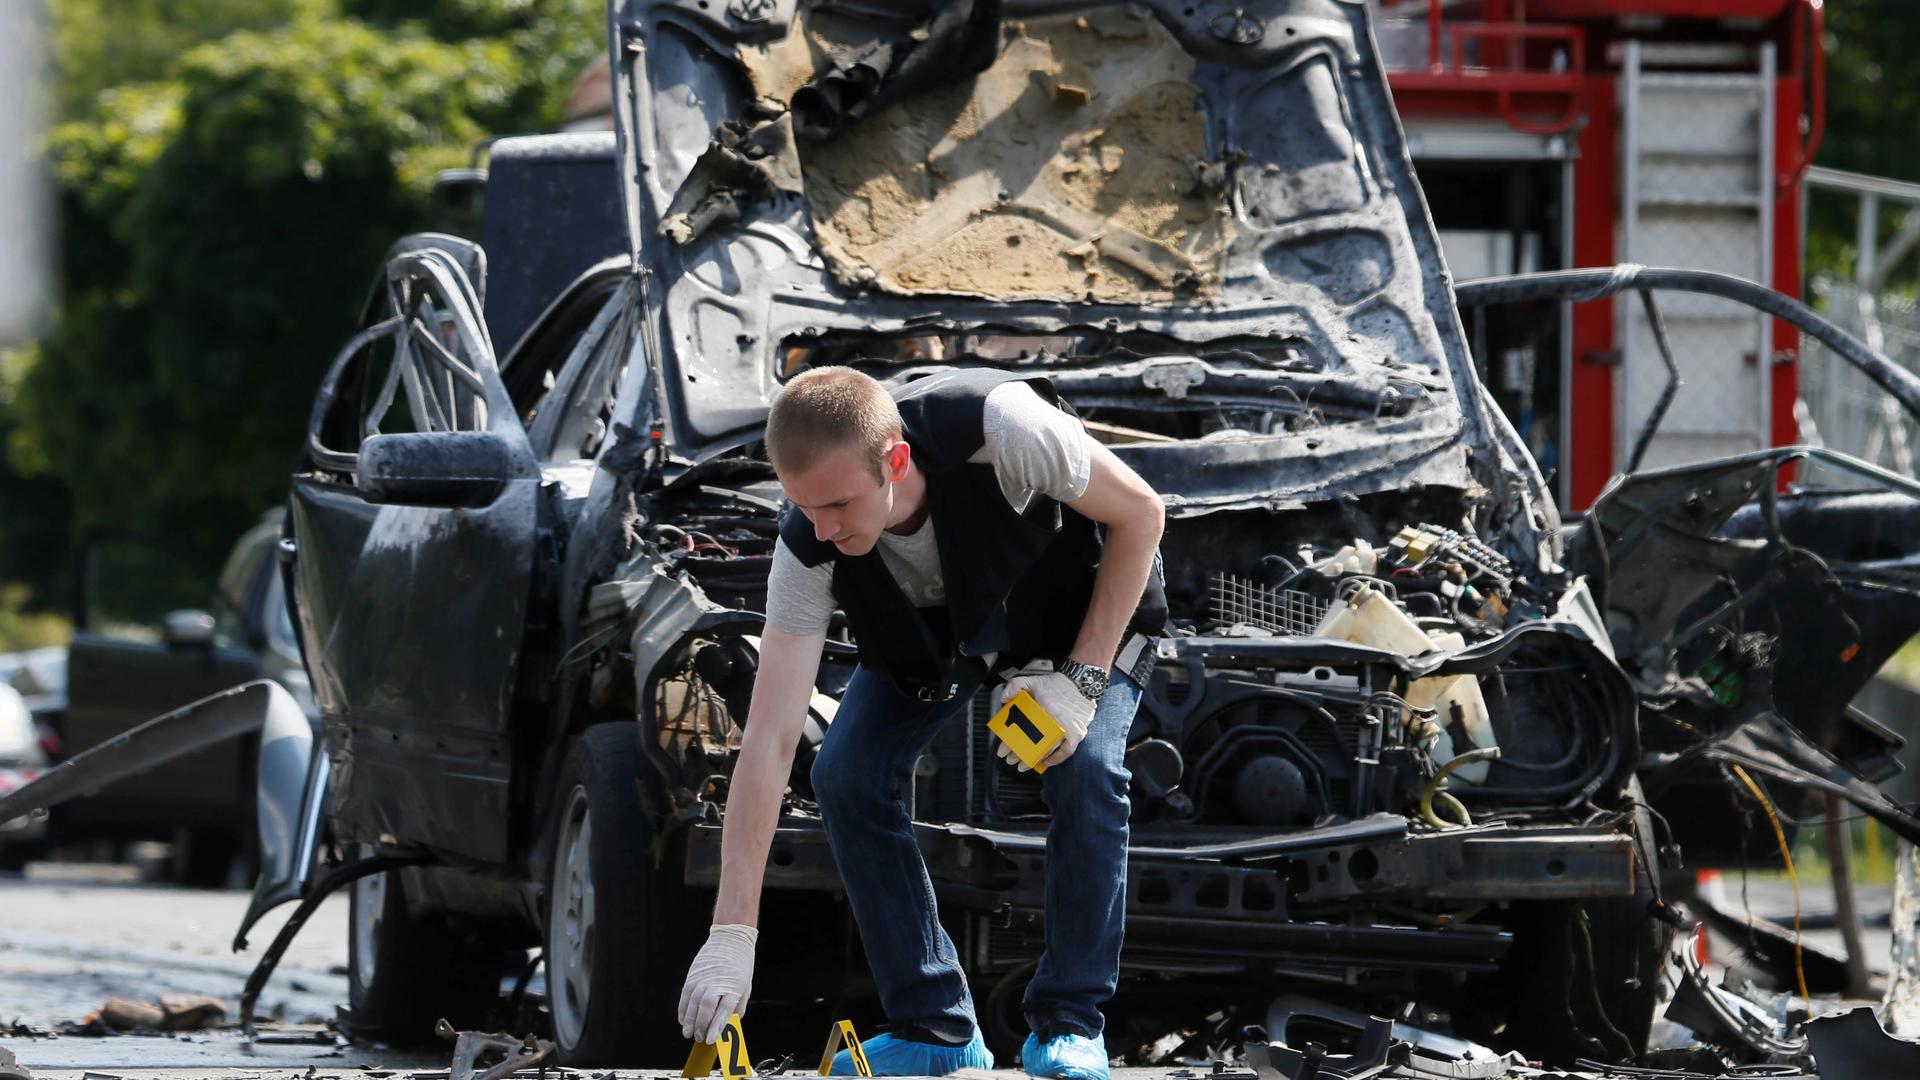 An investigator works at the scene of a car bomb explosion that killed Maksym Shapoval, a high-ranking Ukrainian official involved in military intelligence, in Kiev